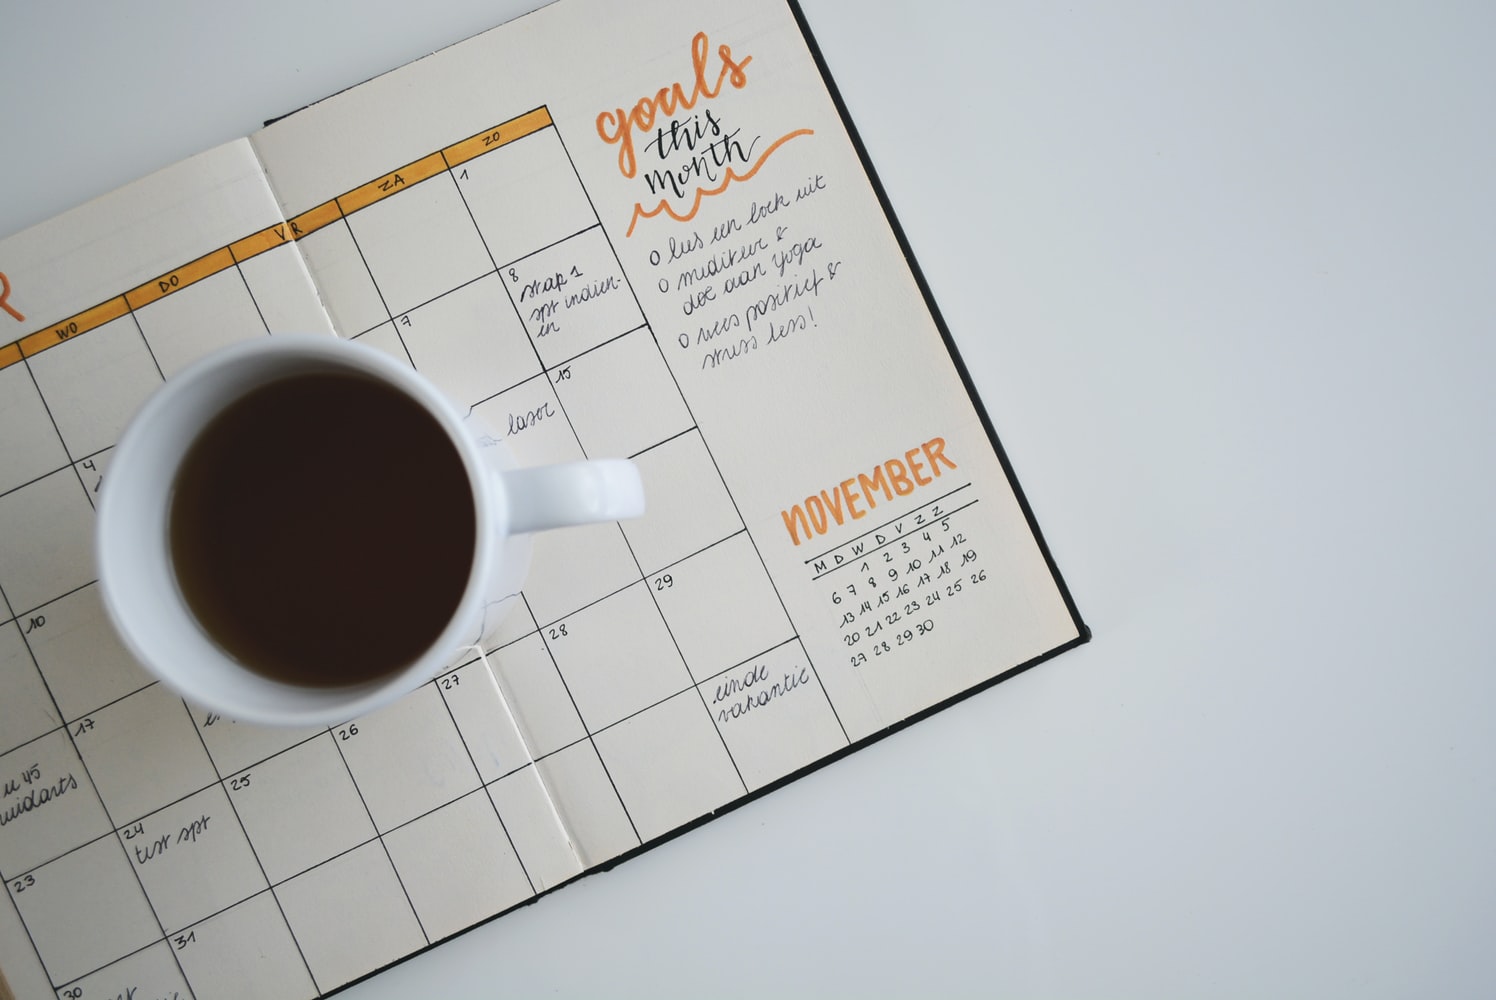 A mug of coffee sitting on top a planner.